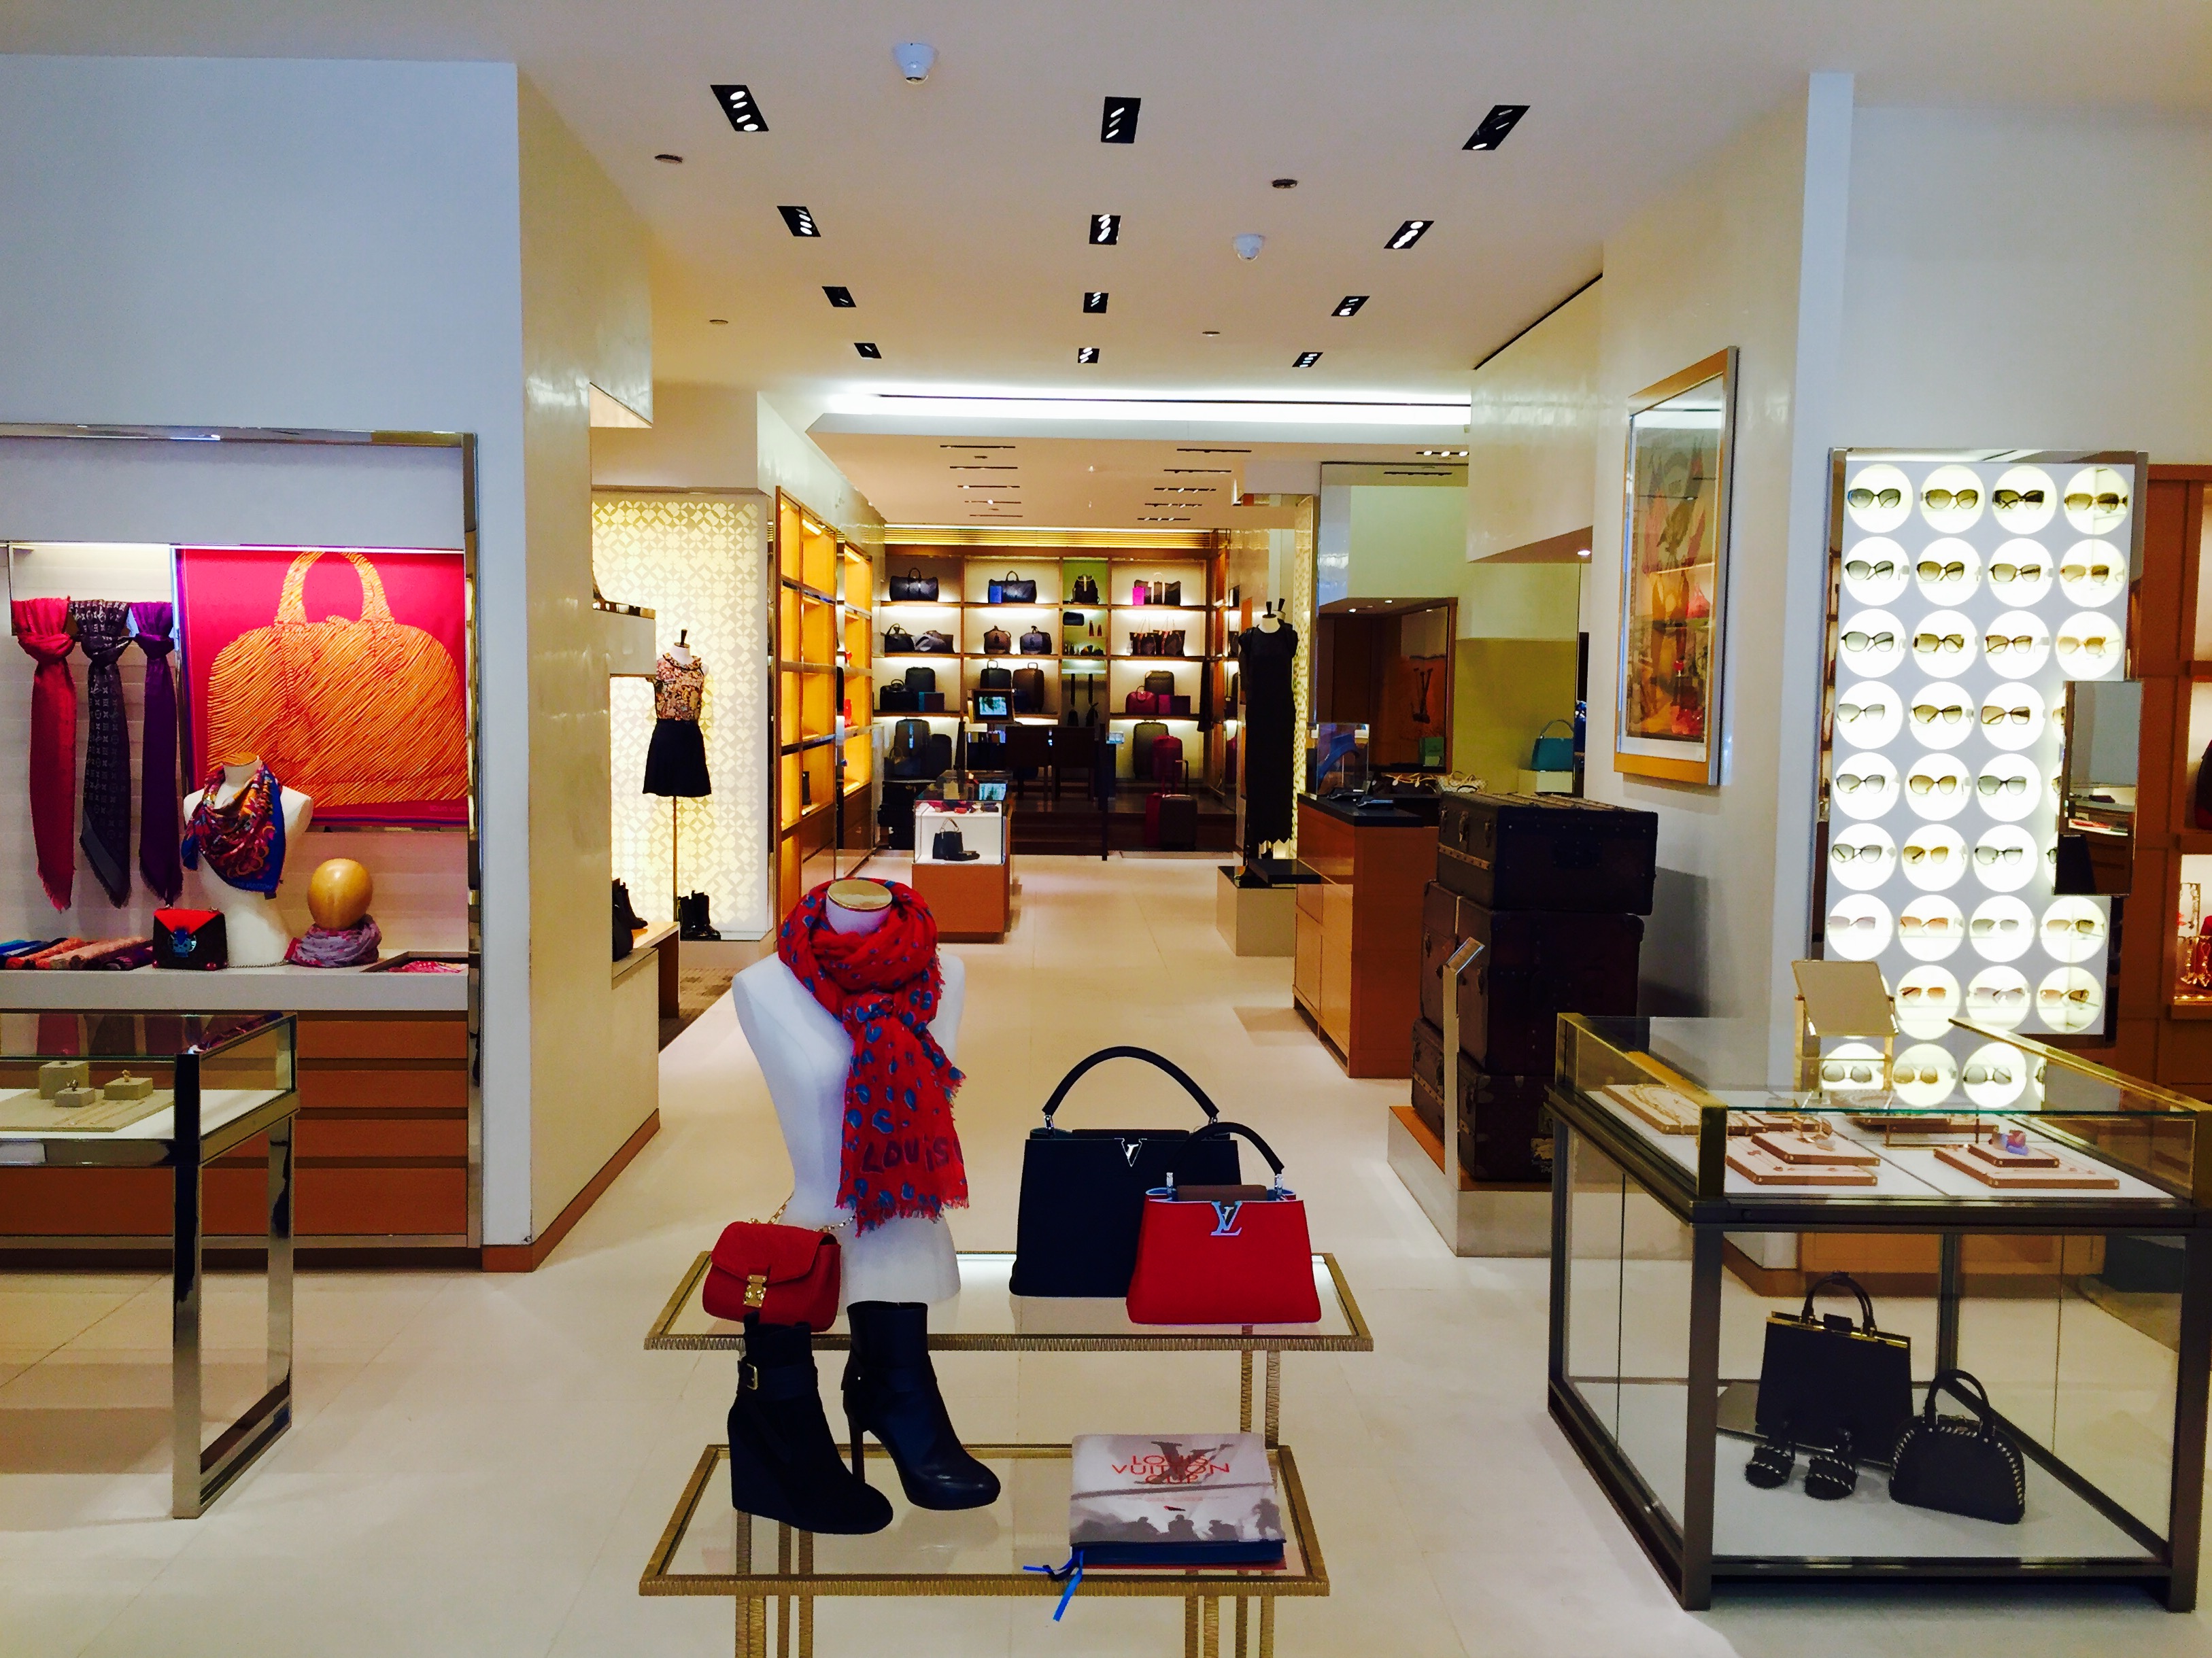 Louis Vuitton In Nordstroms Chicago Il | Confederated Tribes of the Umatilla Indian Reservation